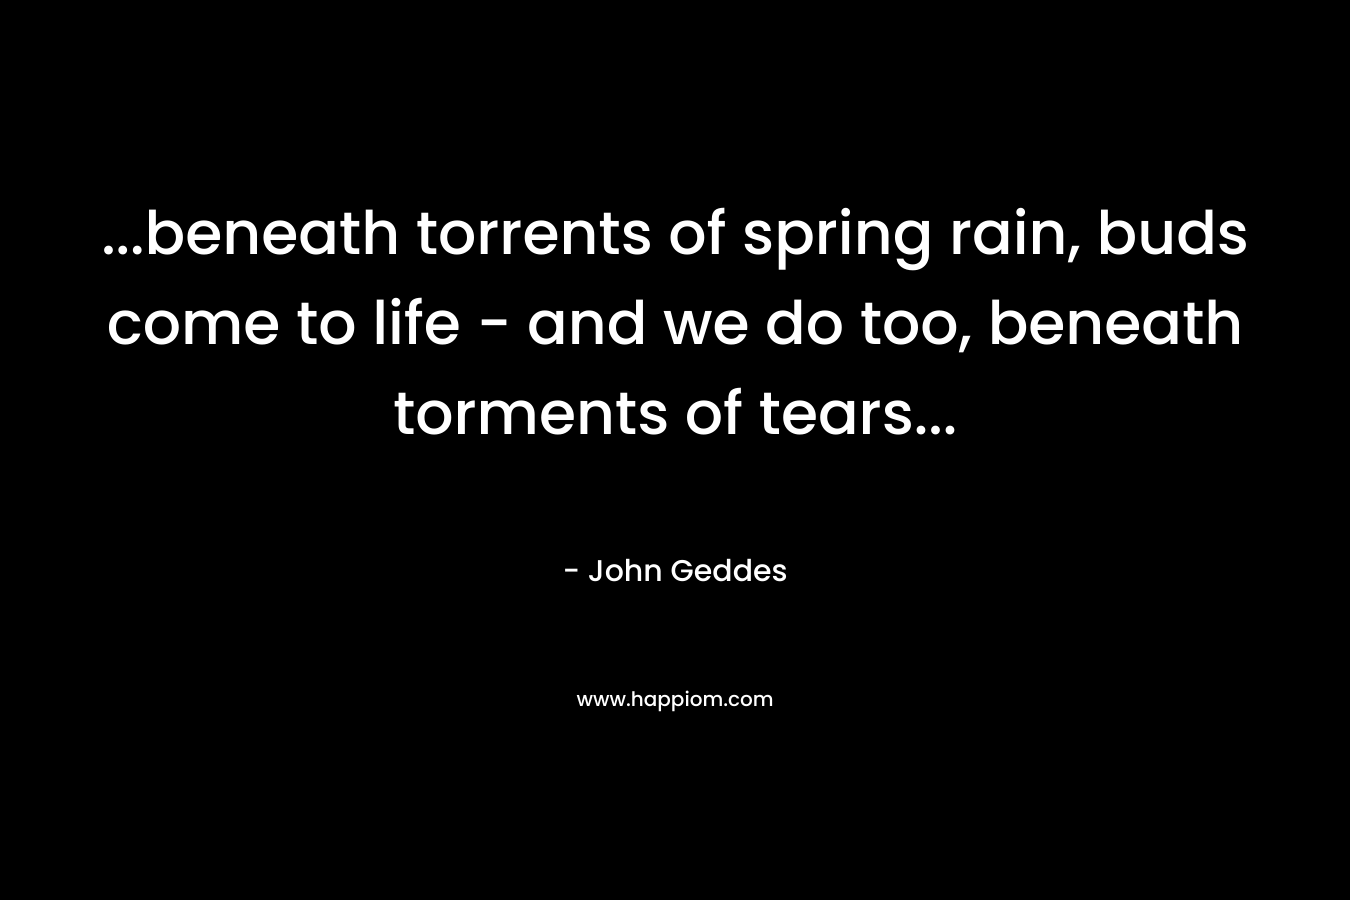 ...beneath torrents of spring rain, buds come to life - and we do too, beneath torments of tears...